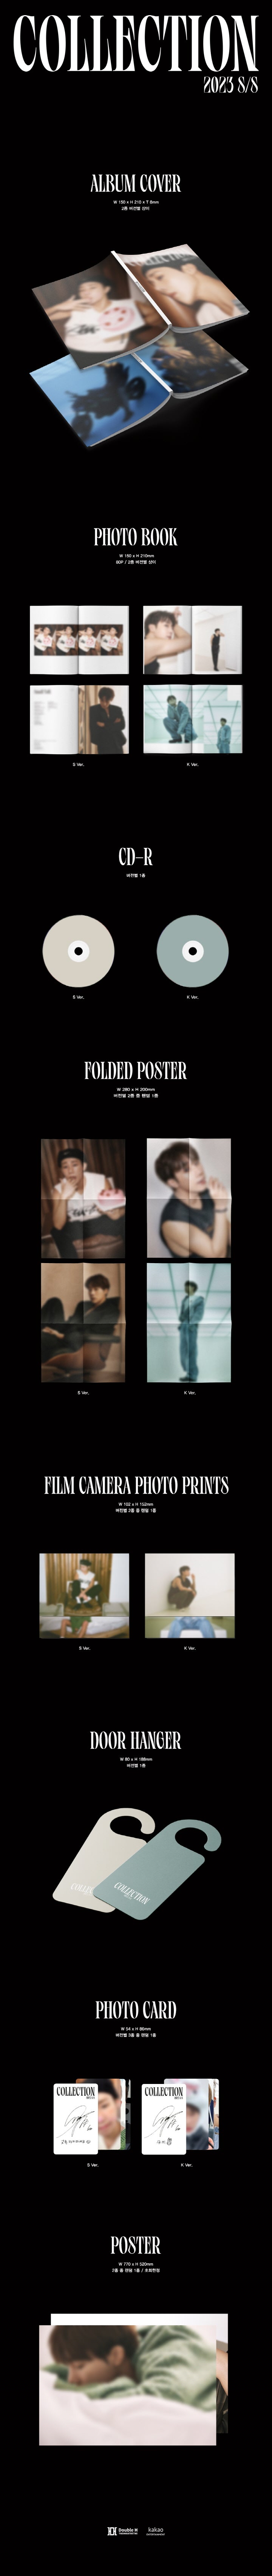 1 CD
1 Photo Book (80 pages)
1 Folded Poster (random out of 2 types)
1 Film Camera Photo Prints (random out of 2 types)
1 ...